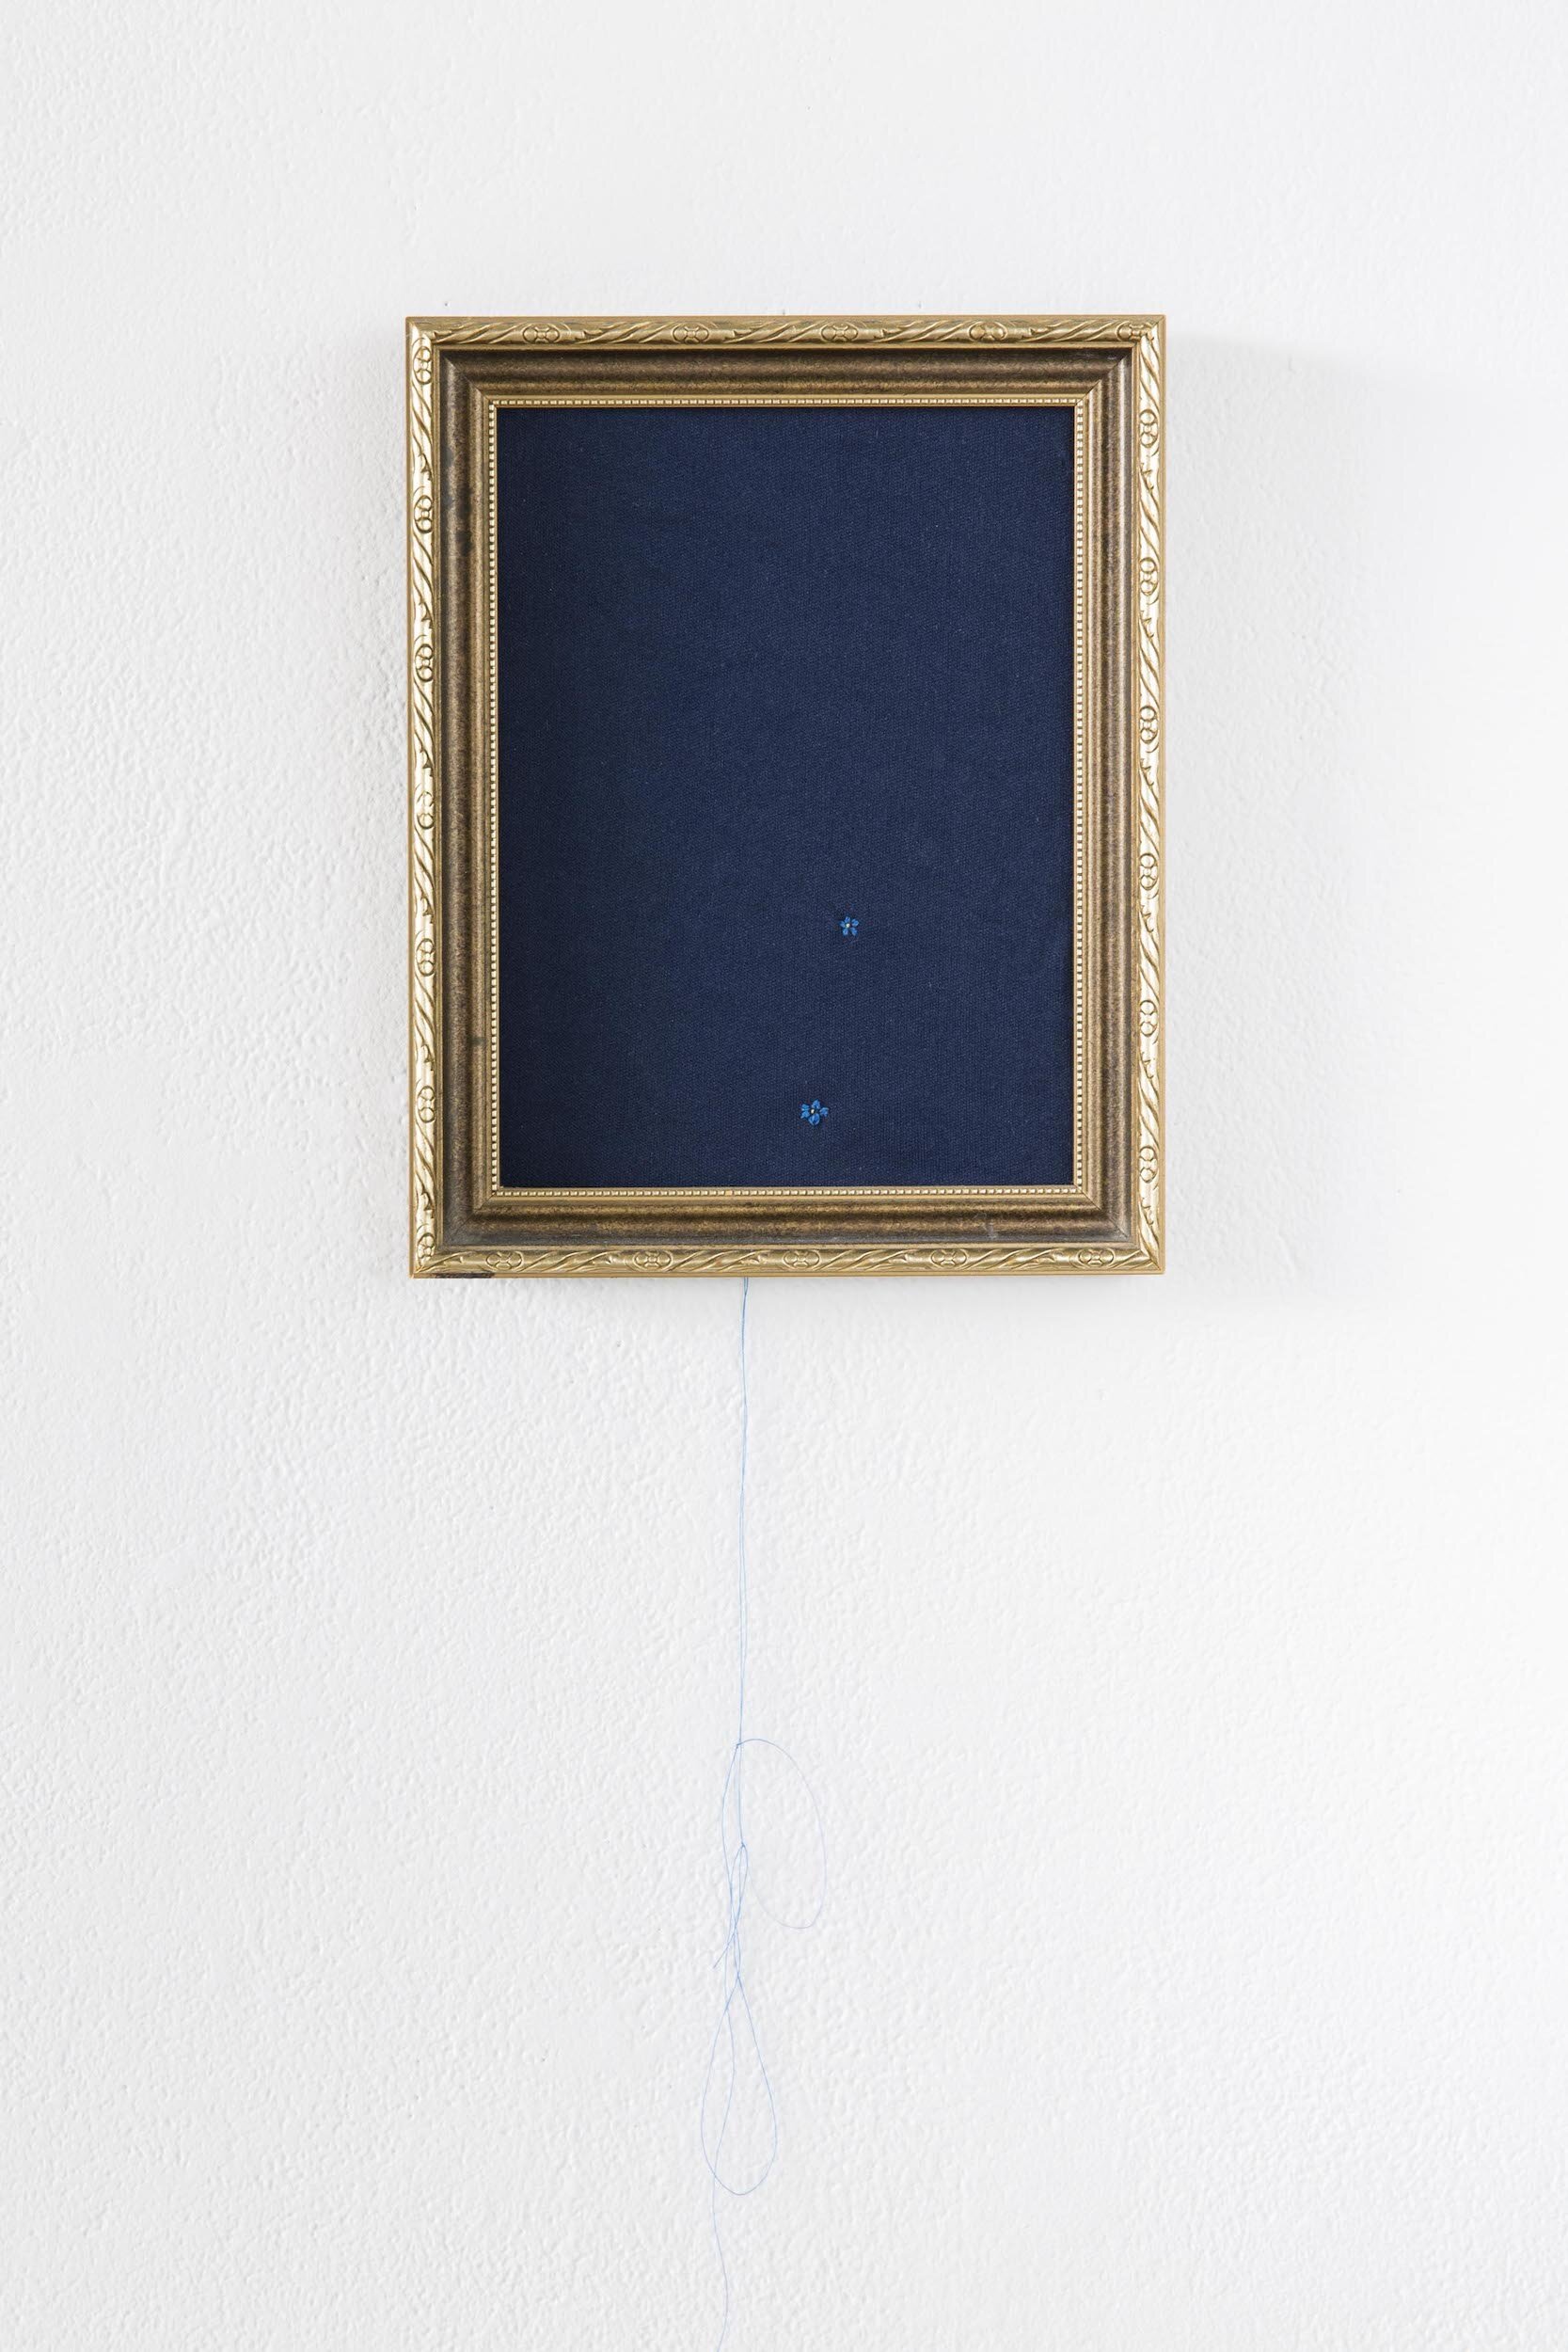  Threads Synthetic materials framed 23 x 18 cm  2019 Photograph by Lucy Foster 